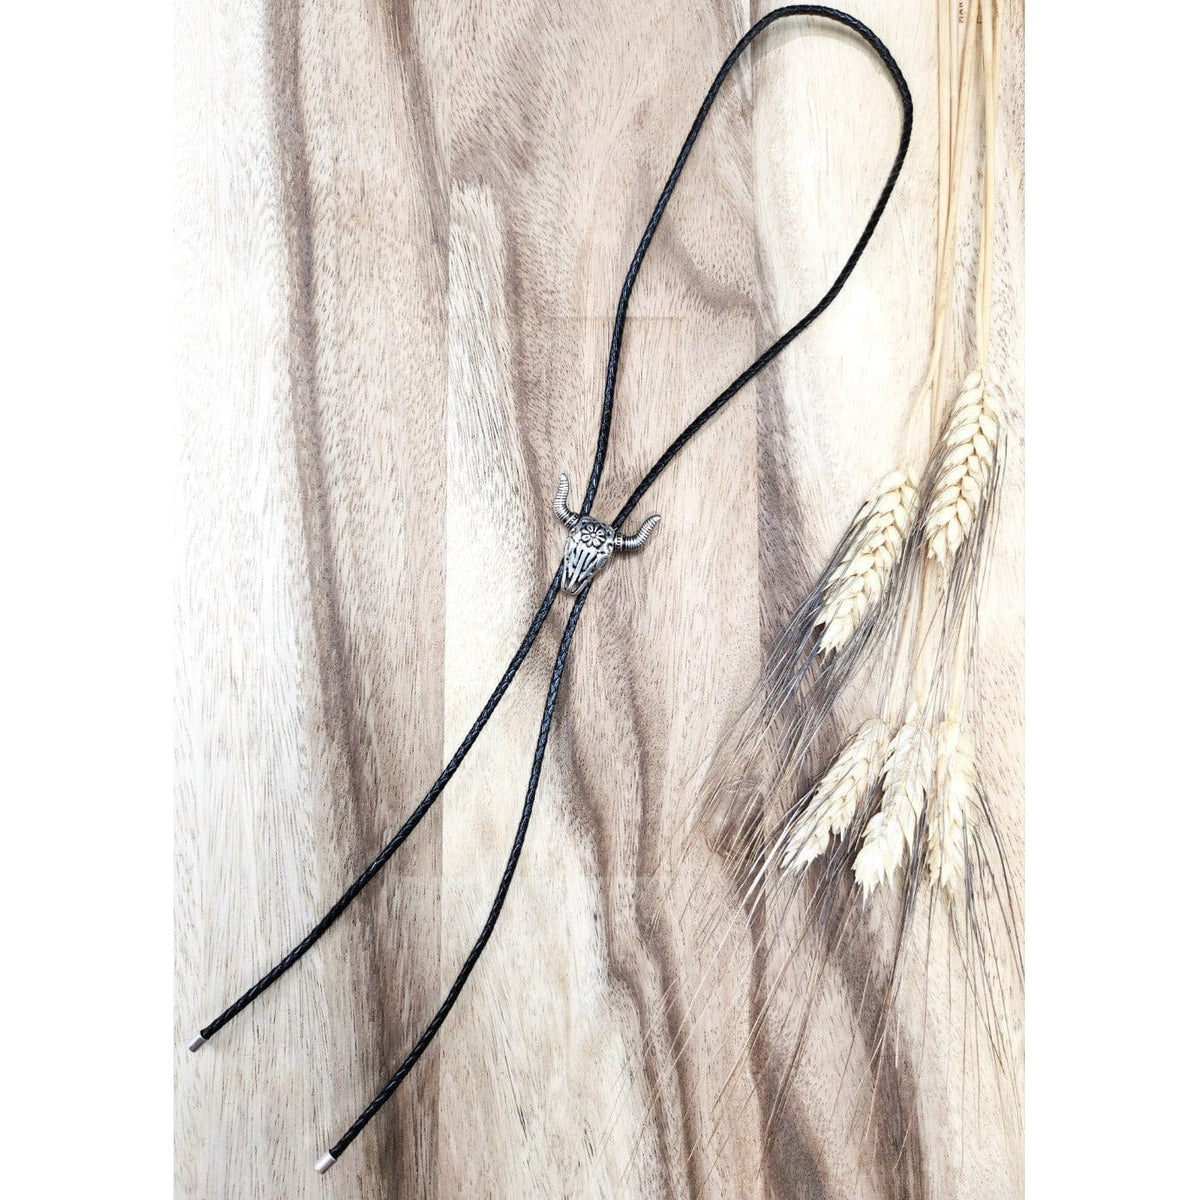 Bull Fighter Bolo Tie Necklace necklace TheFringeCultureCollective